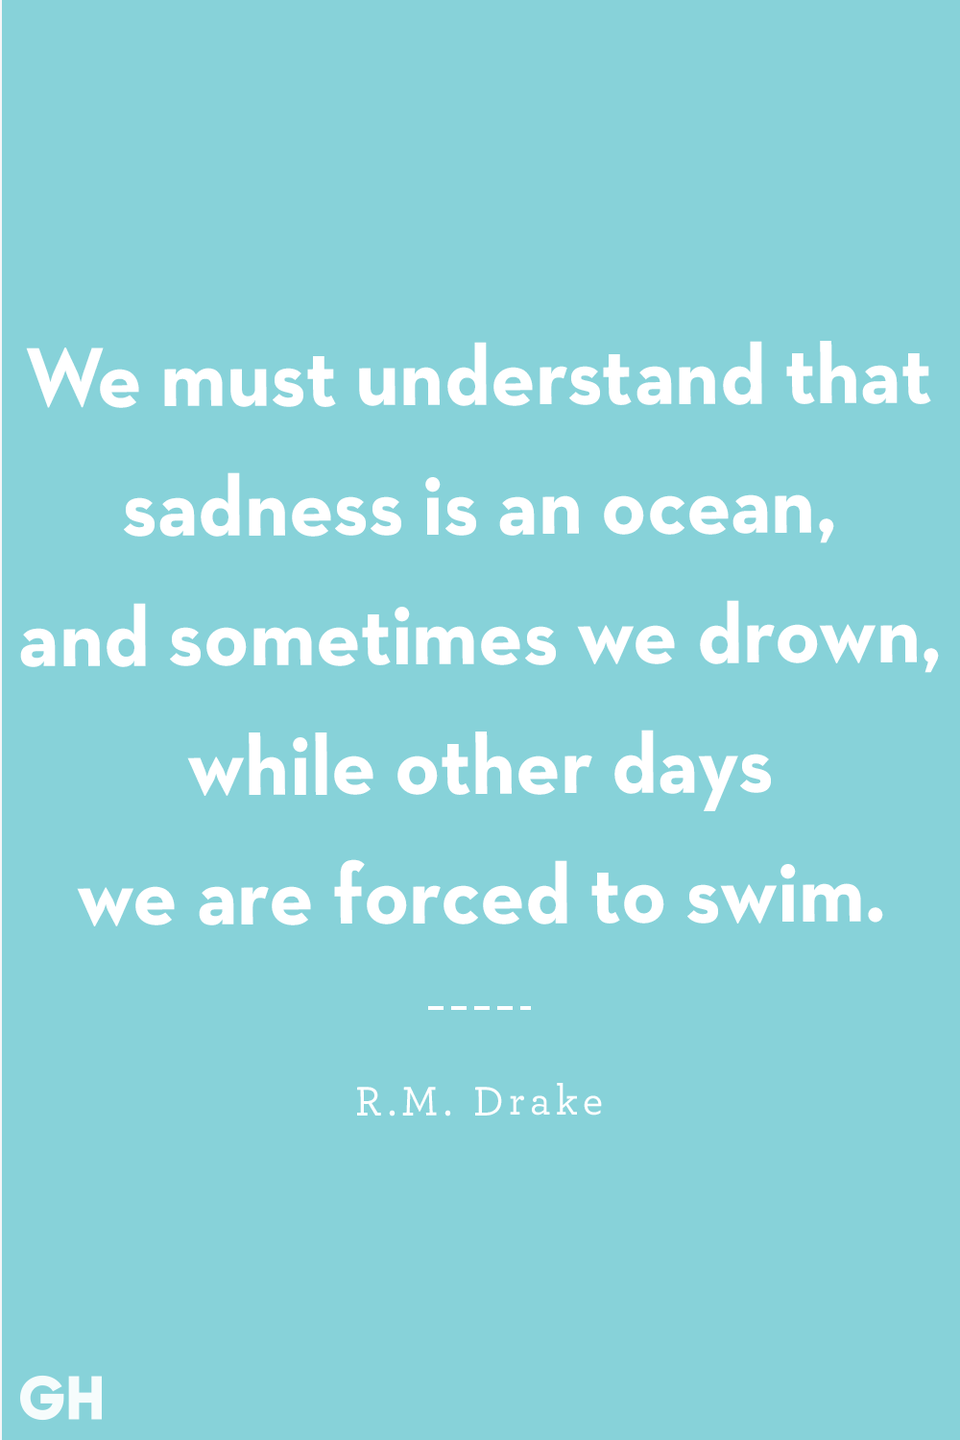 <p>We must understand that sadness is an ocean, and sometimes we drown, while other days we are forced to swim. </p>